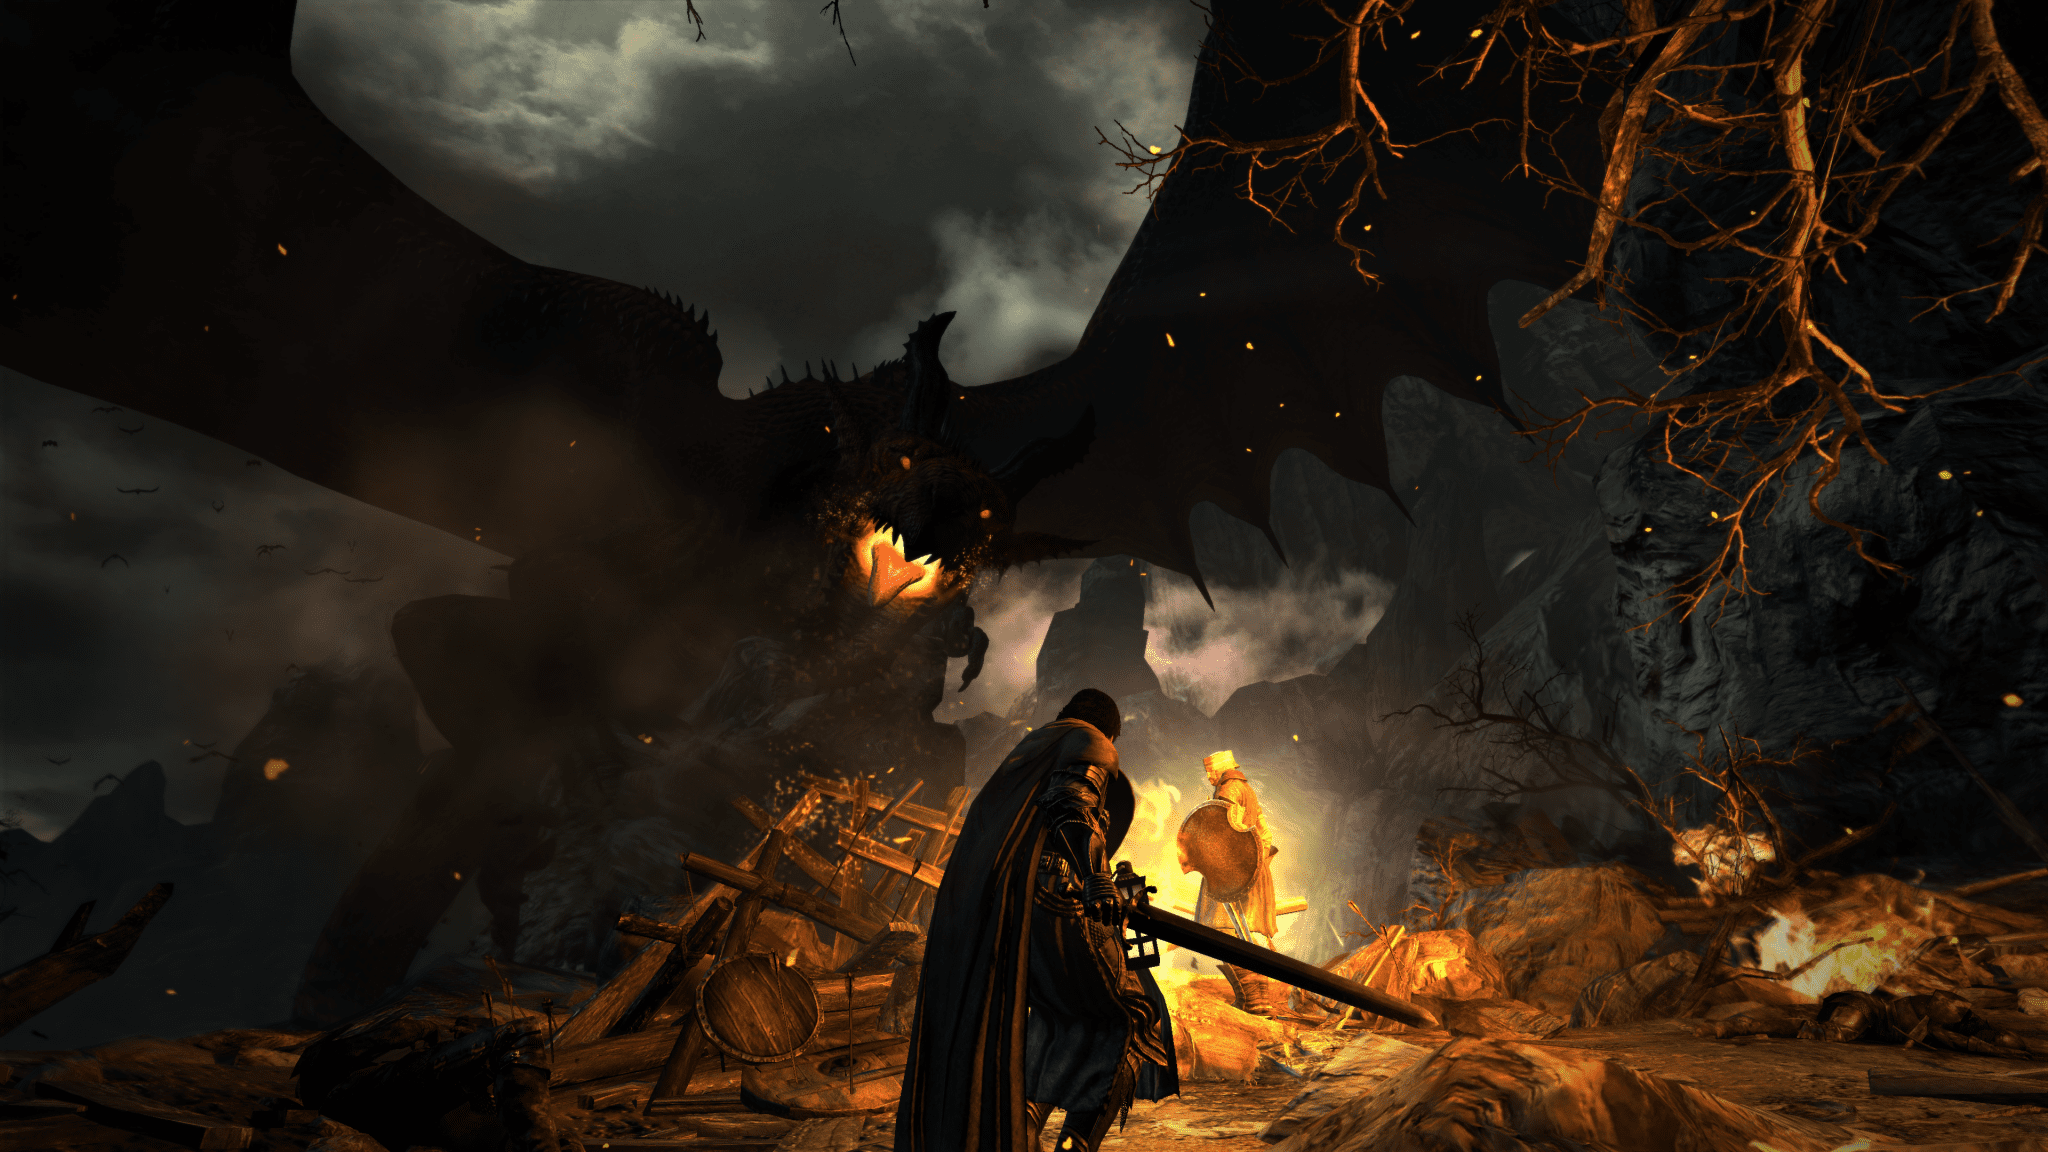 Dragon's Dogma 2 feels very similar to the original, for better and worse